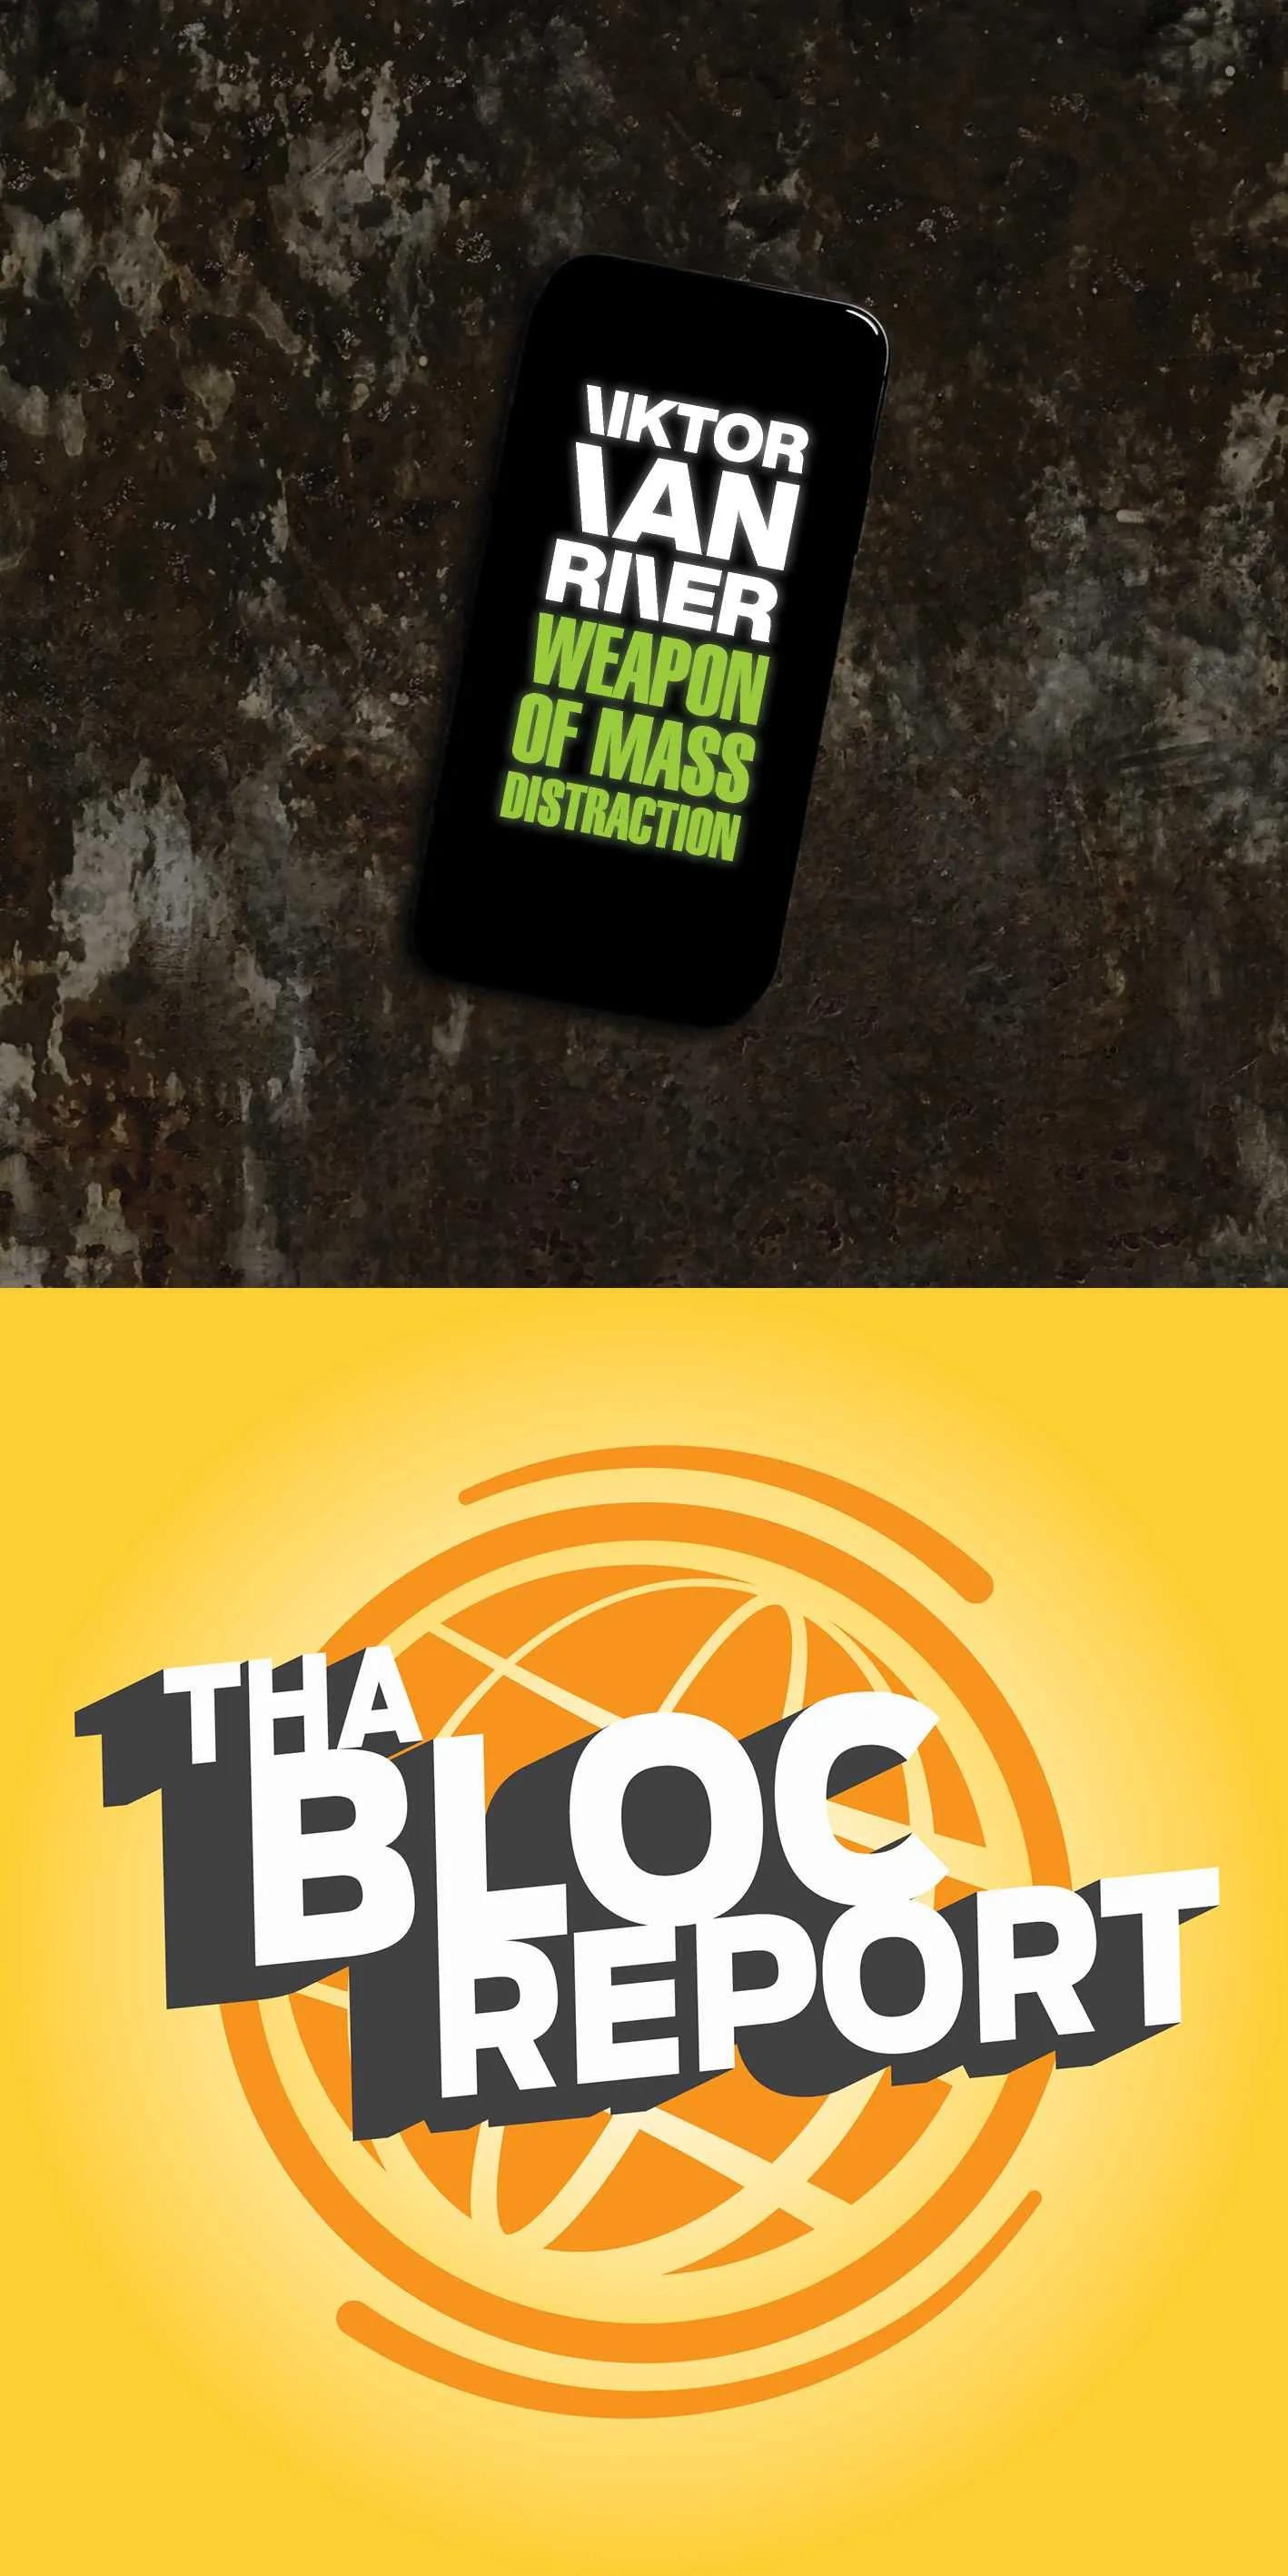 Cover art of Viktor Van River’s “Weapon Of Mass Distraction” and Tha Bloc Report